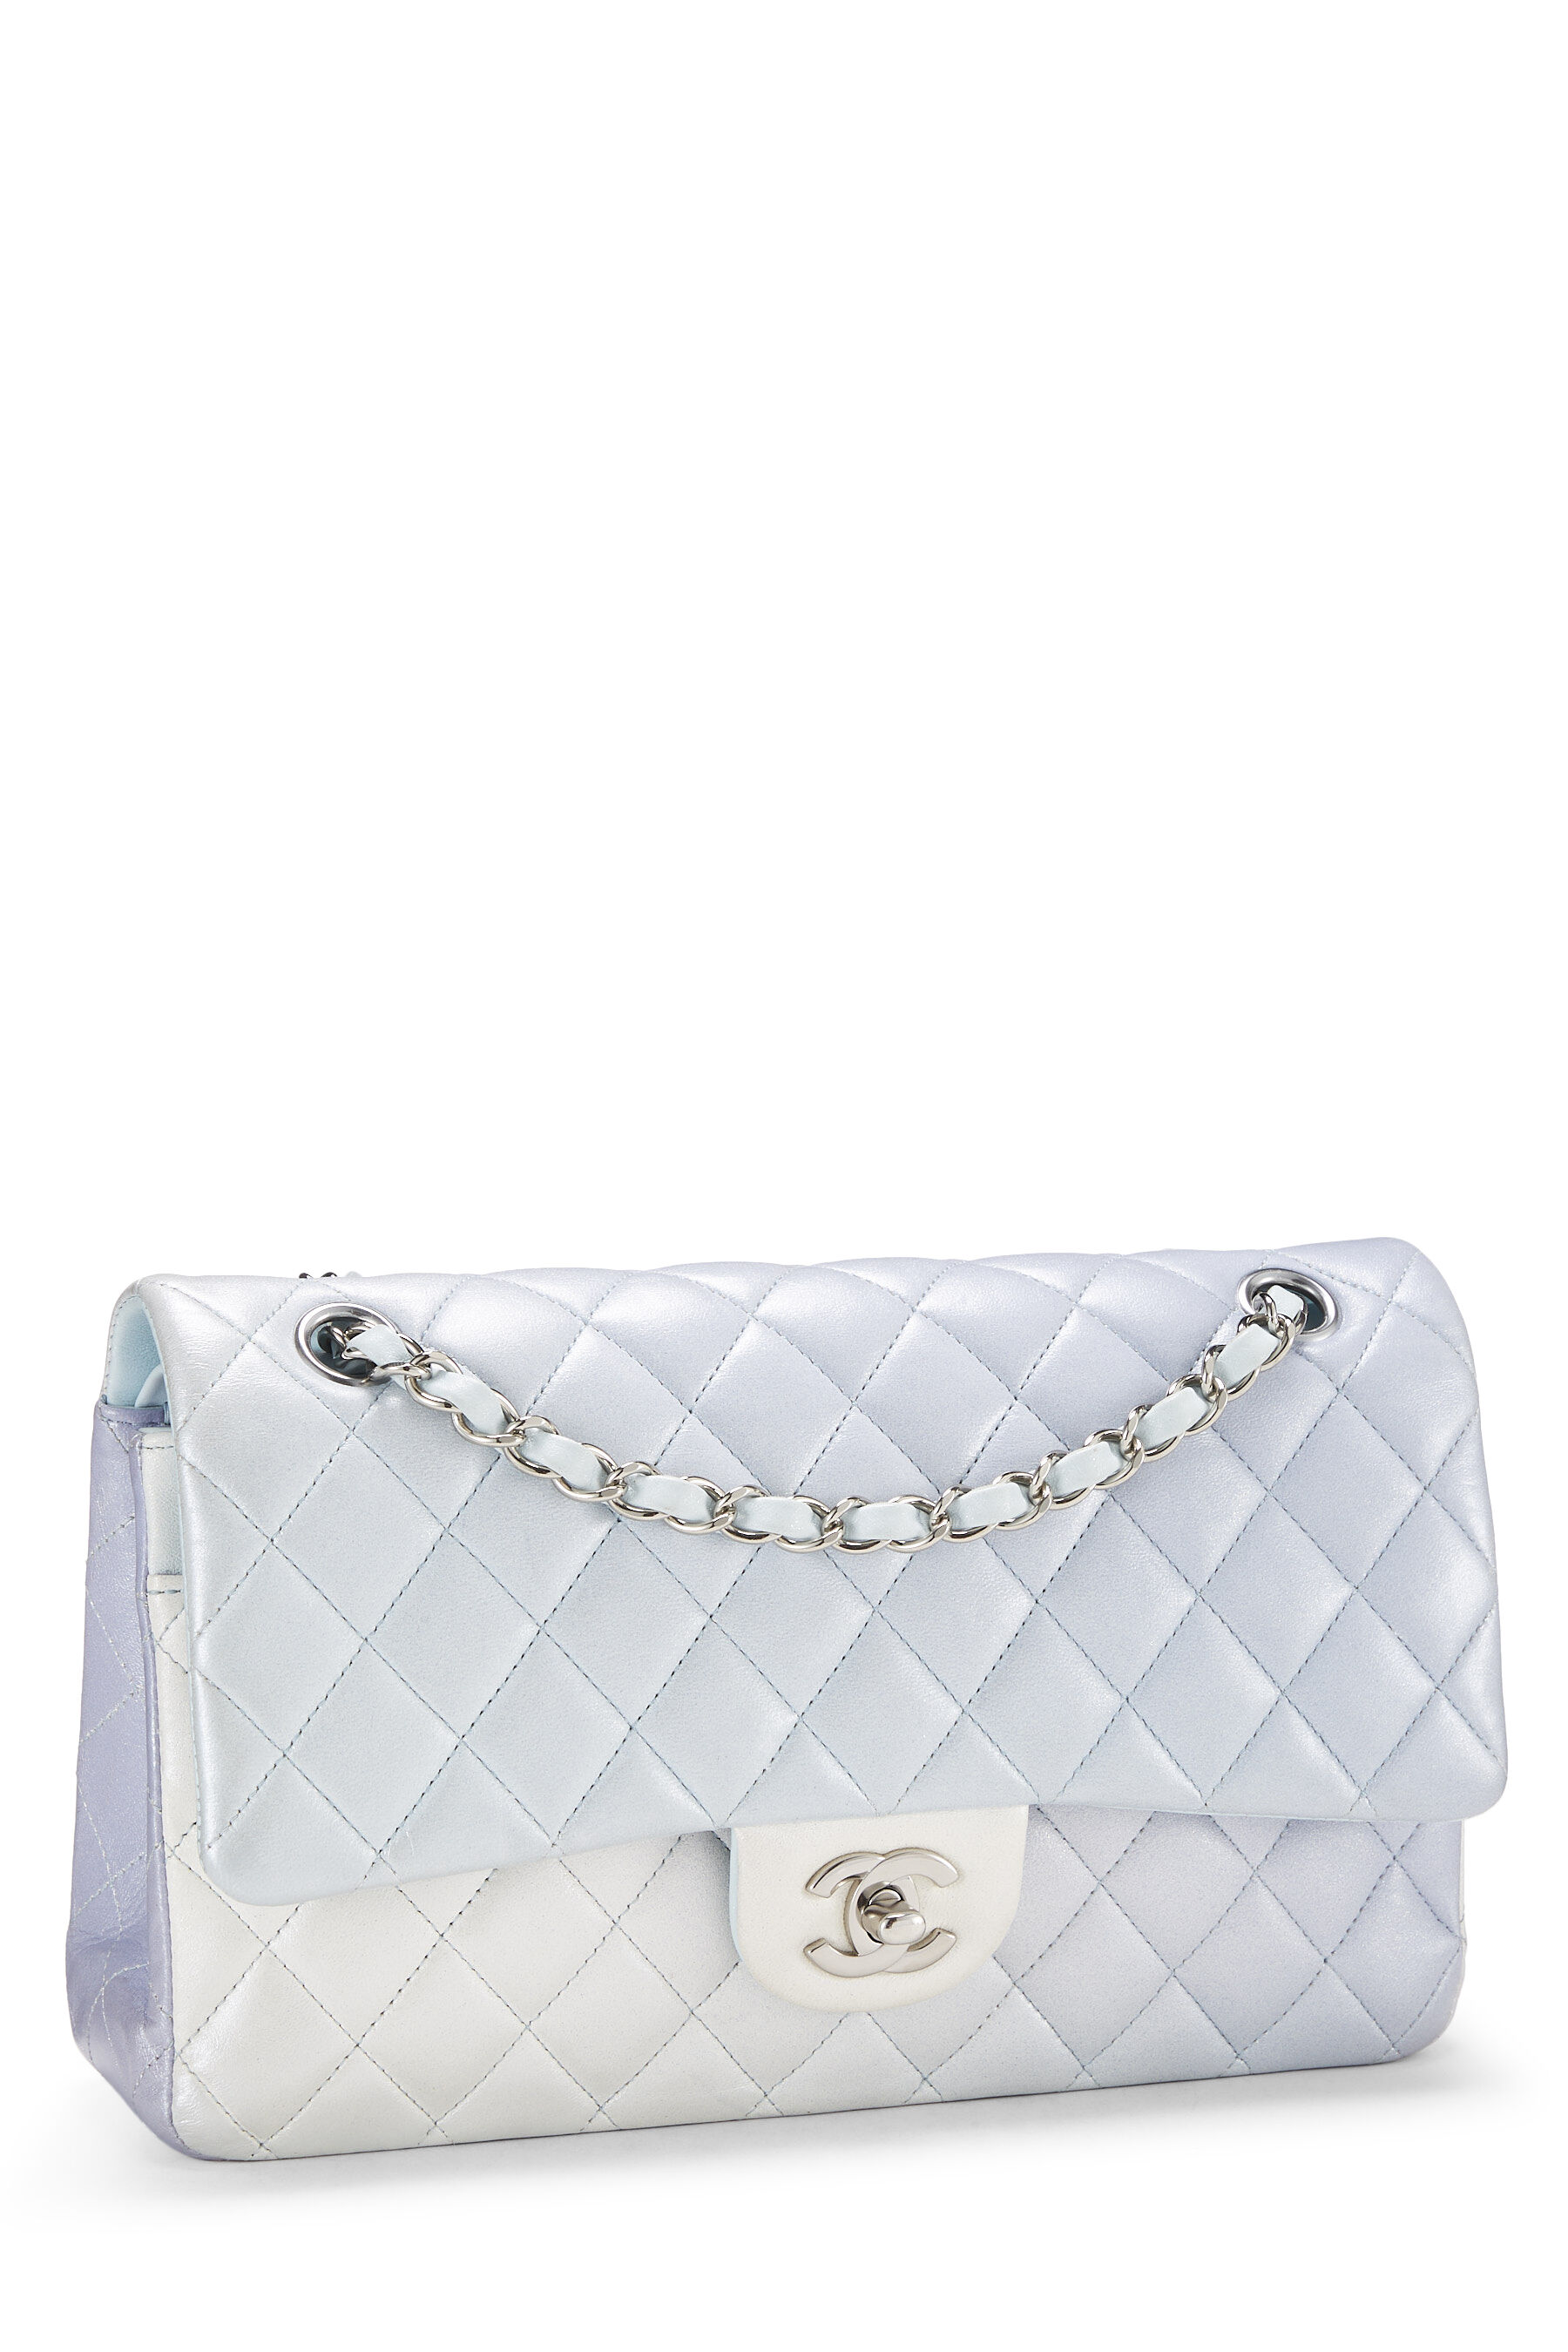 CHANEL Classic Flap Blue Bags & Handbags for Women for sale